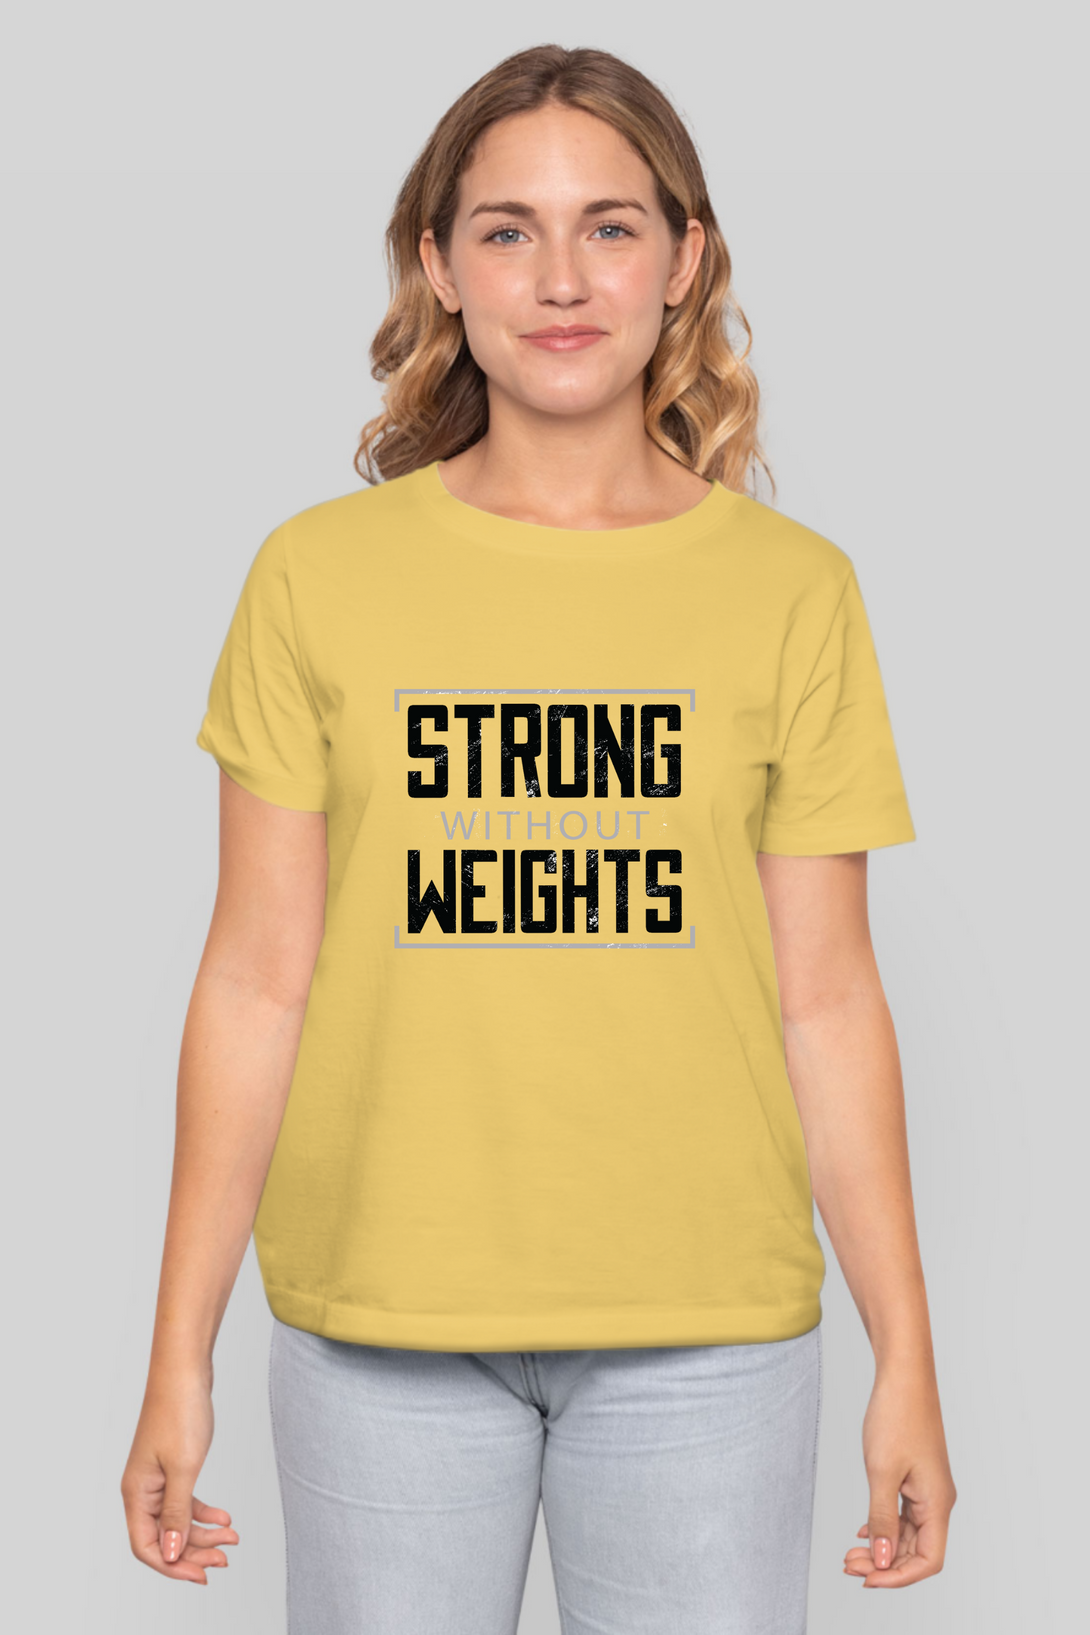 Strong Without Weights Printed T-Shirt For Women - WowWaves - 7